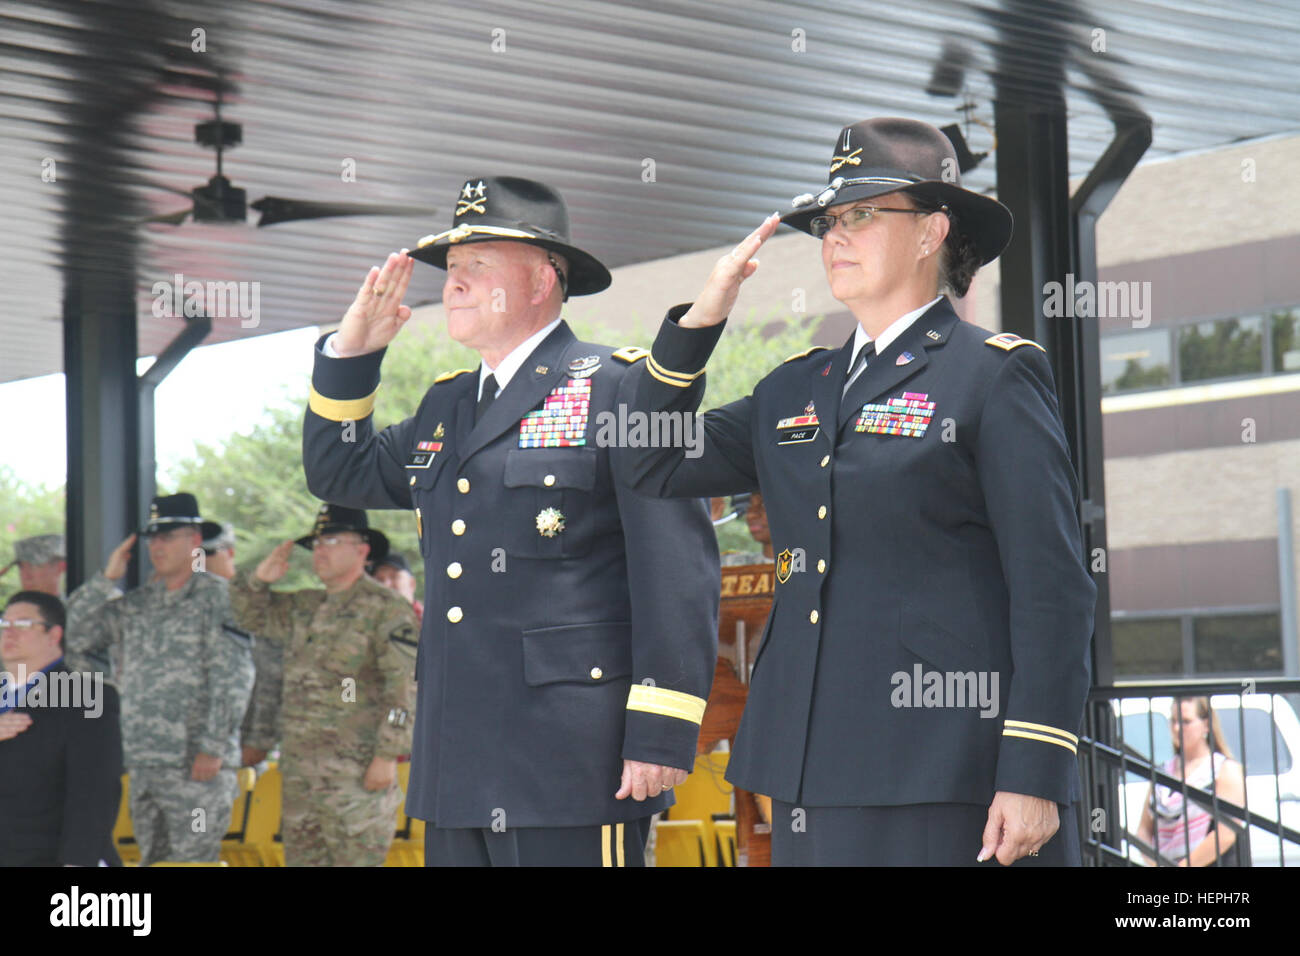 Chief Warrant Officer 5 Jeanne Pace (right), former bandmaster for the 1st Cavalry Division Band, salutes alongside Maj. Gen. Michael Bills, commanding general, 1st Cavalry Division, during her retirement ceremony July 10 on Cooper Field at Fort Hood, Texas. Pace retired after serving more than 43 years of service in the Army. (U.S. Army photo by Staff Sgt. Christopher Calvert, 1st Cavalry Division PAO/Released) Trooper retires after 43-year career 150710-A-WD324-029 Stock Photo